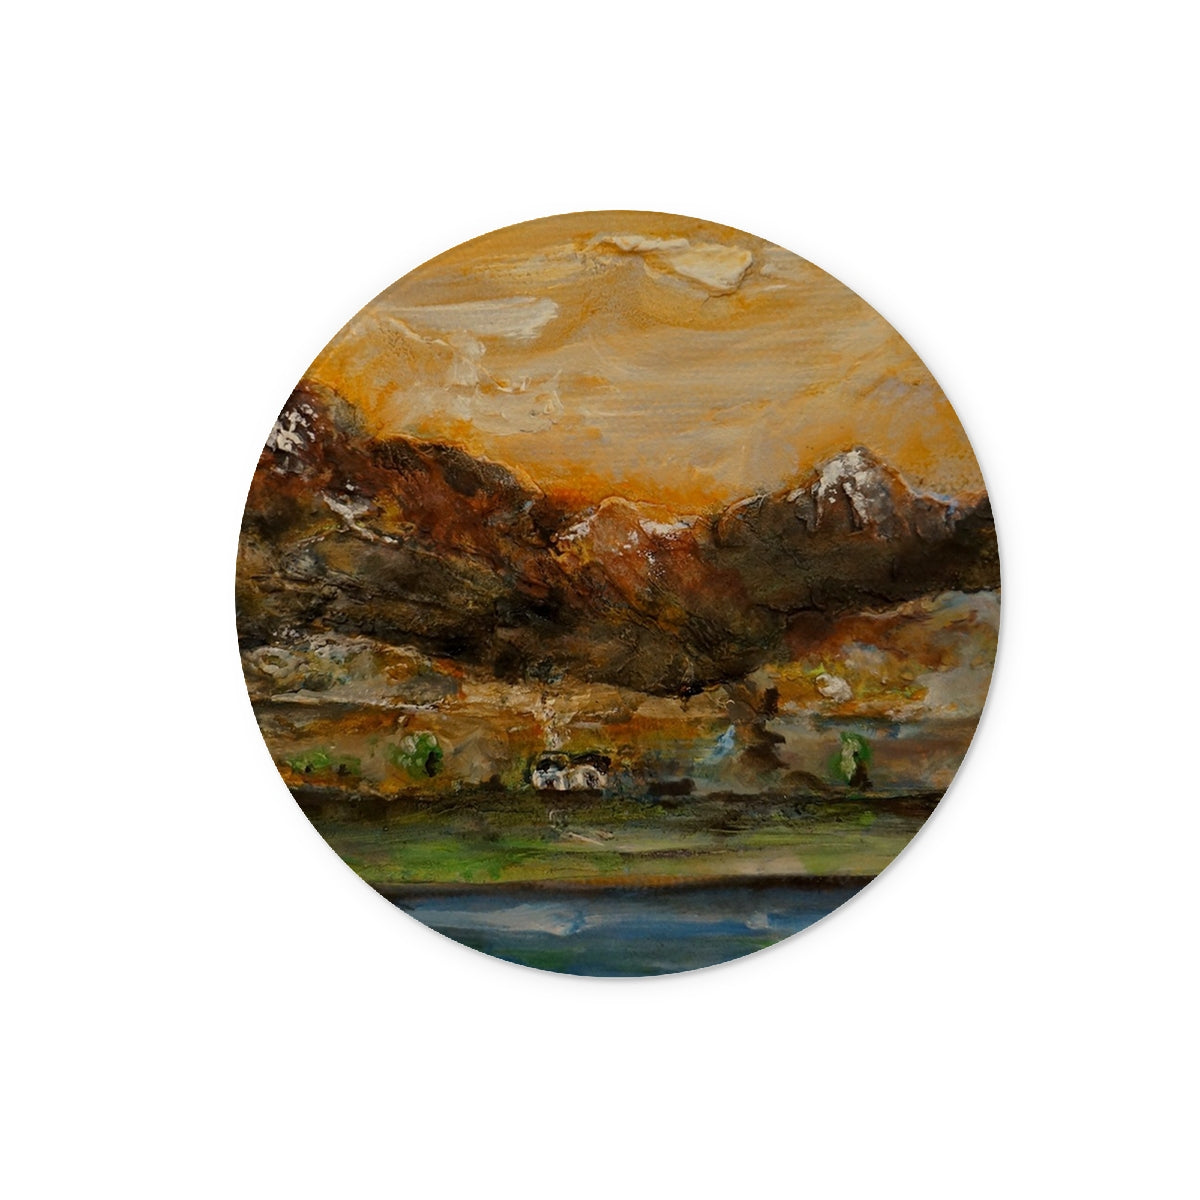 A Glencoe Cottage Art Gifts Glass Chopping Board-Glass Chopping Boards-Glencoe Art Gallery-12" Round-Paintings, Prints, Homeware, Art Gifts From Scotland By Scottish Artist Kevin Hunter